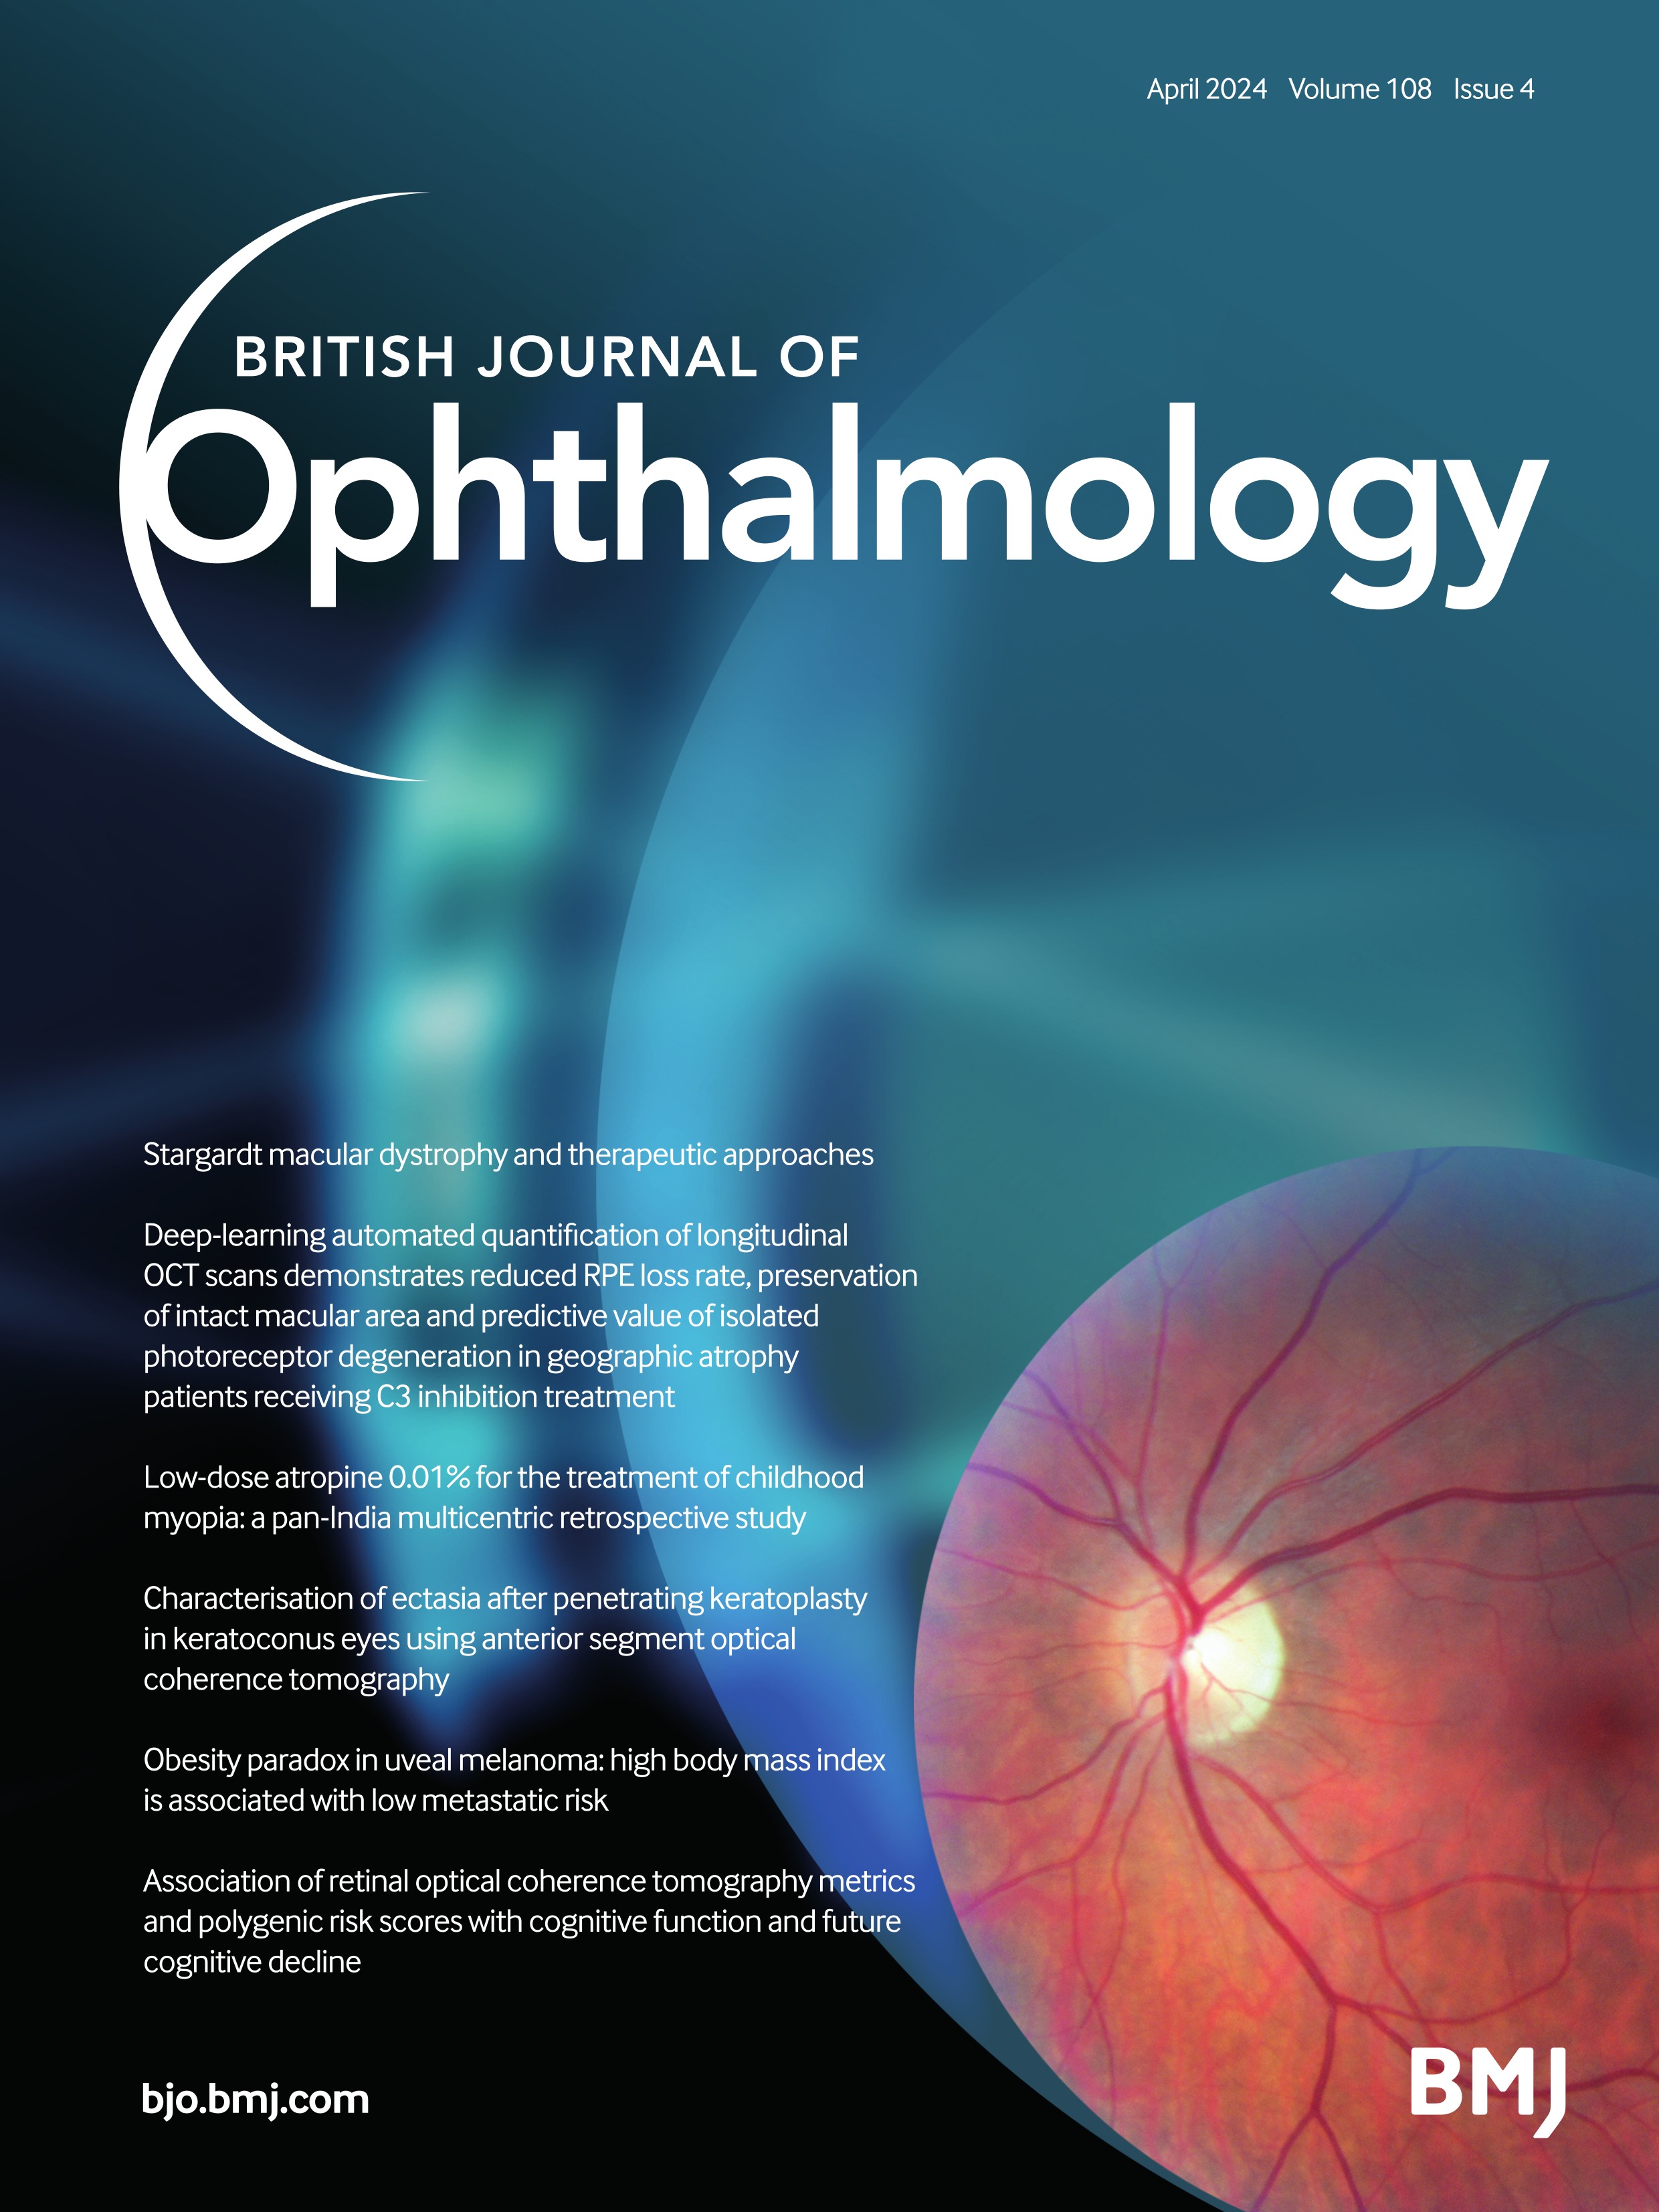 Papillary vitreous detachment as a possible accomplice in non-arteritic anterior ischaemic optic neuropathy